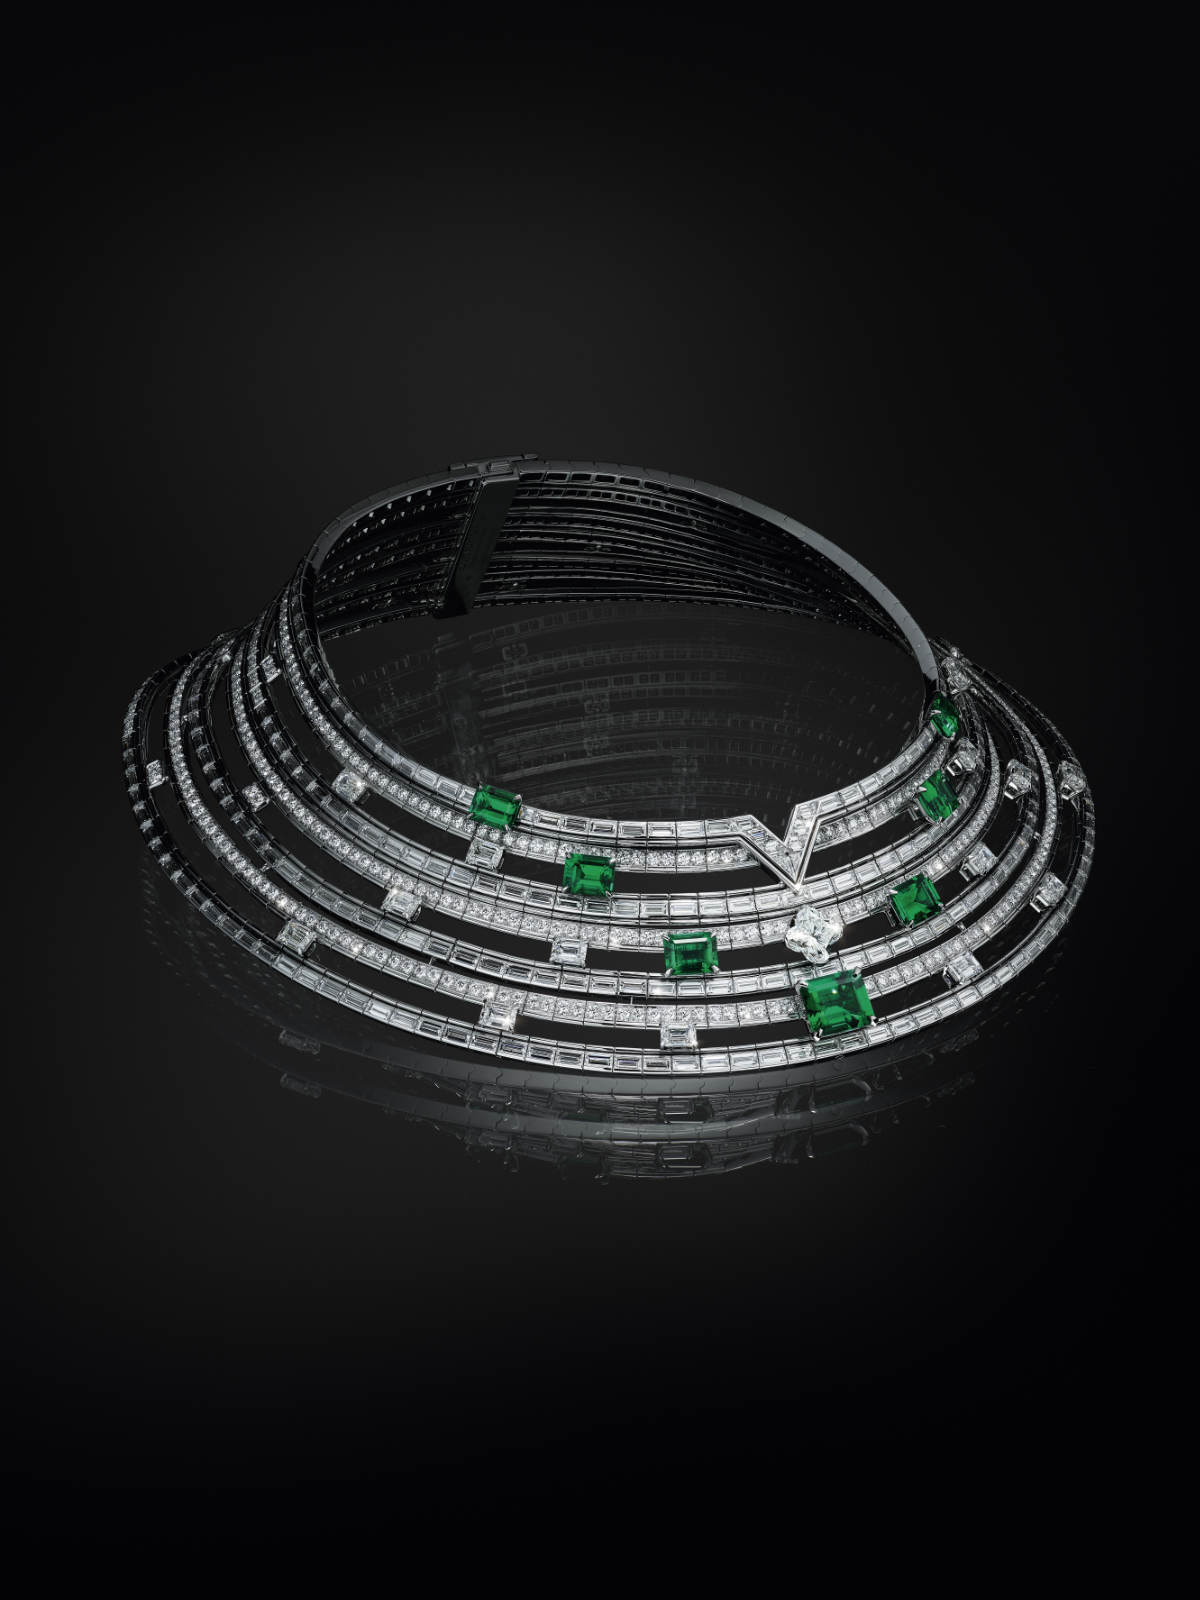 Louis Vuitton Presents Its New High Jewellery Collection: Deep Time